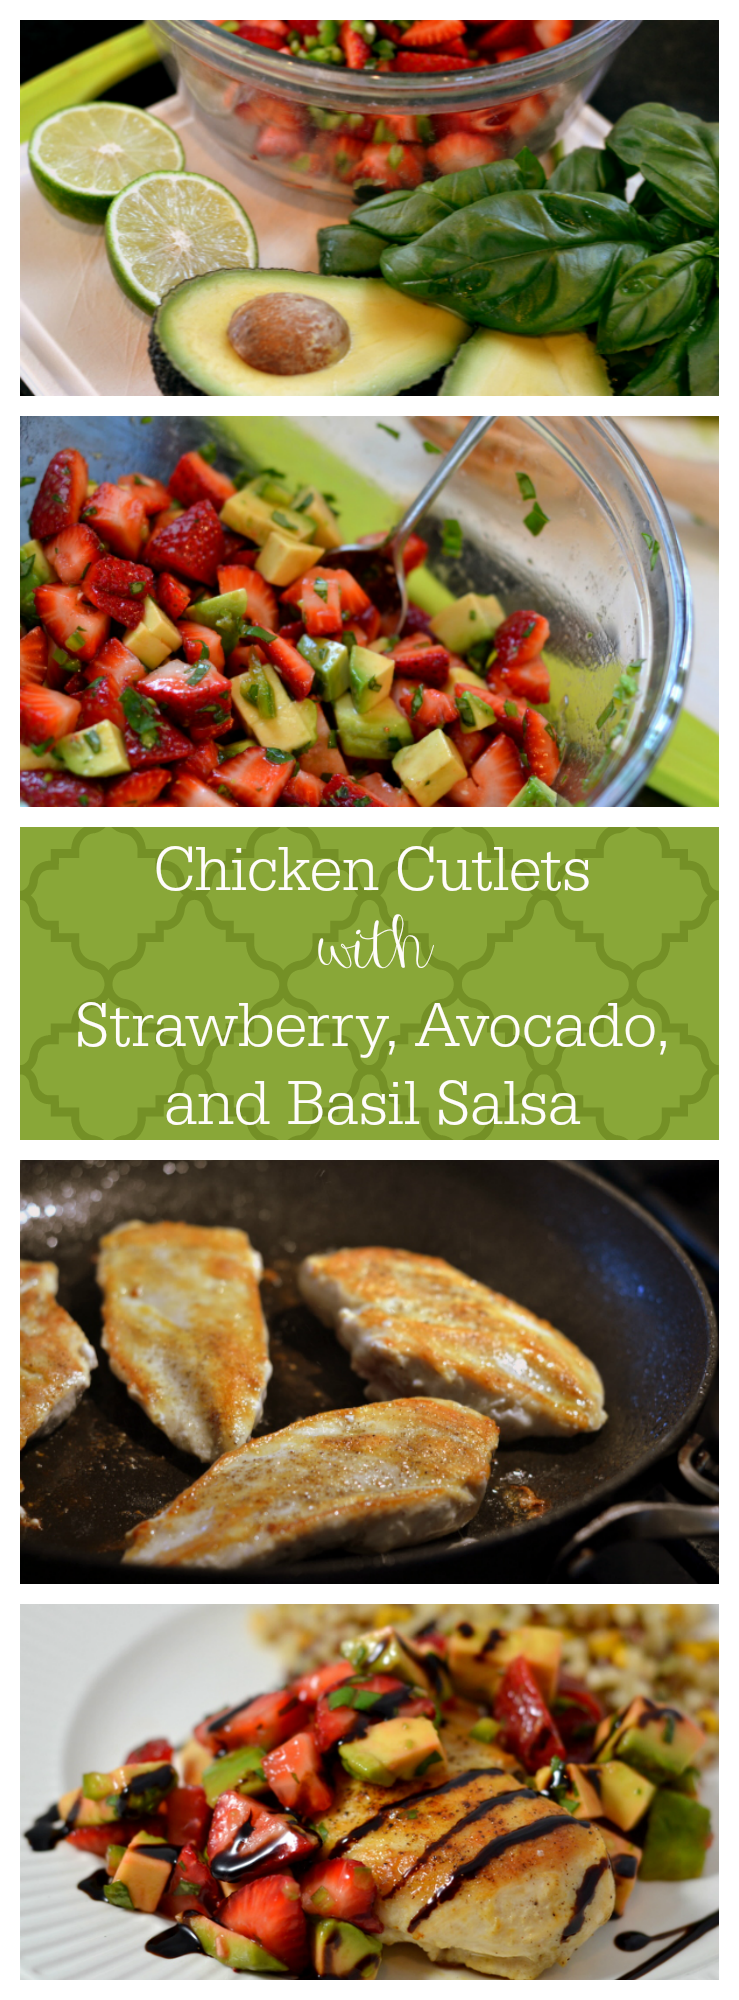 Chicken Cutlets with Strawberry, Avocado, and Basil Salsa - Find this quick summer recipe at Chew Nibble Nosh.